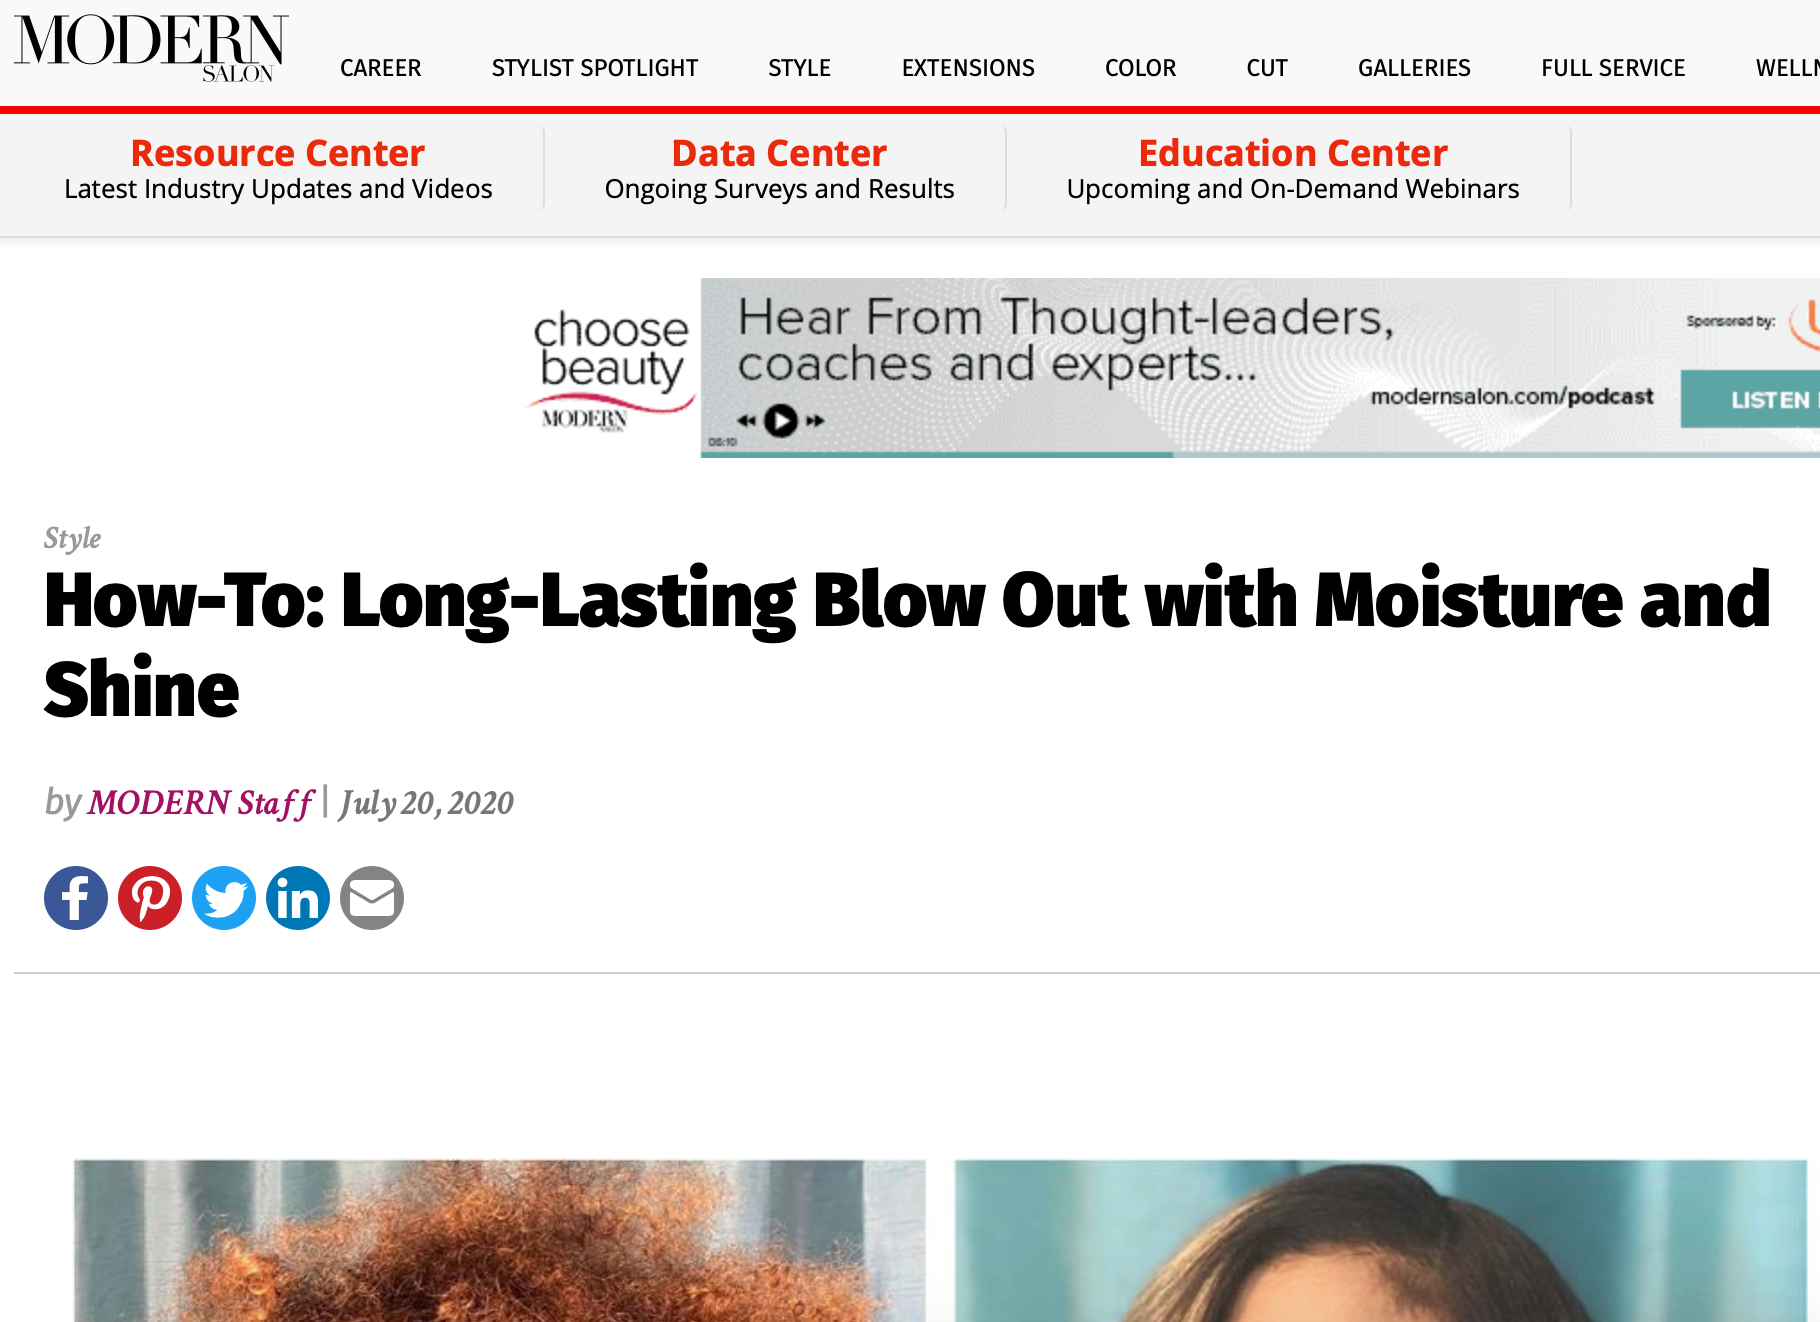 How-To: Long-Lasting Blow Out with Moisture and Shine